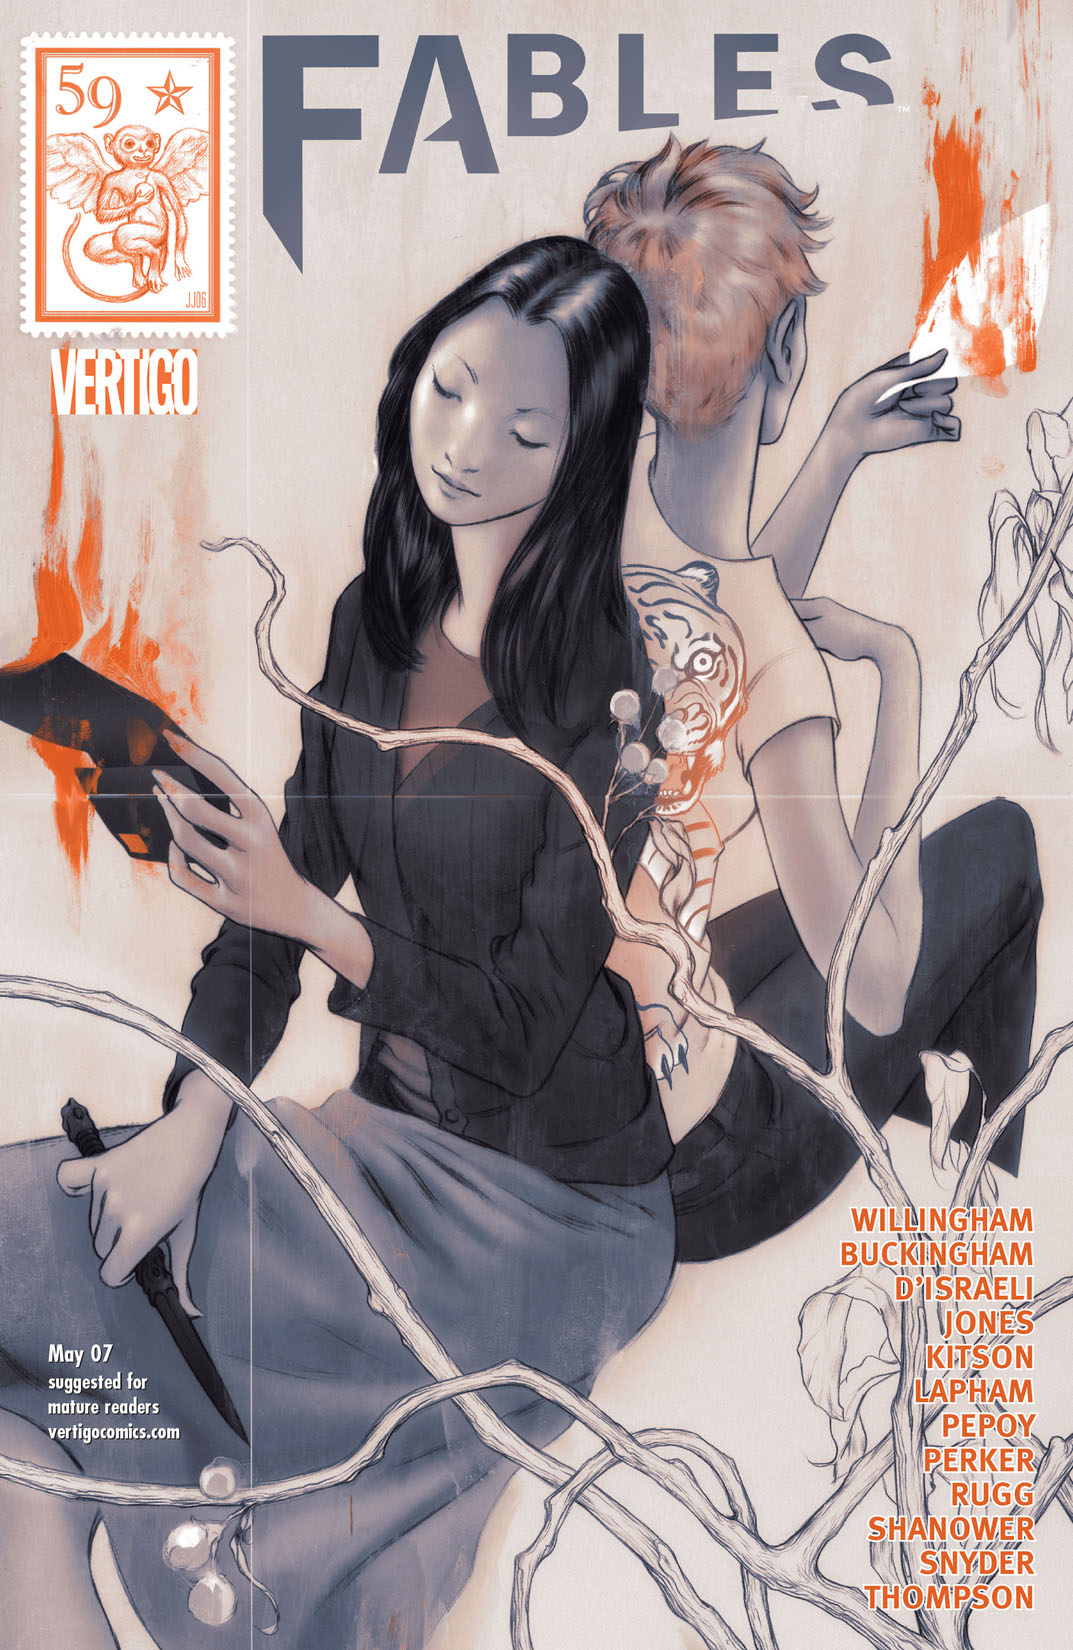 Fables #59 preview images